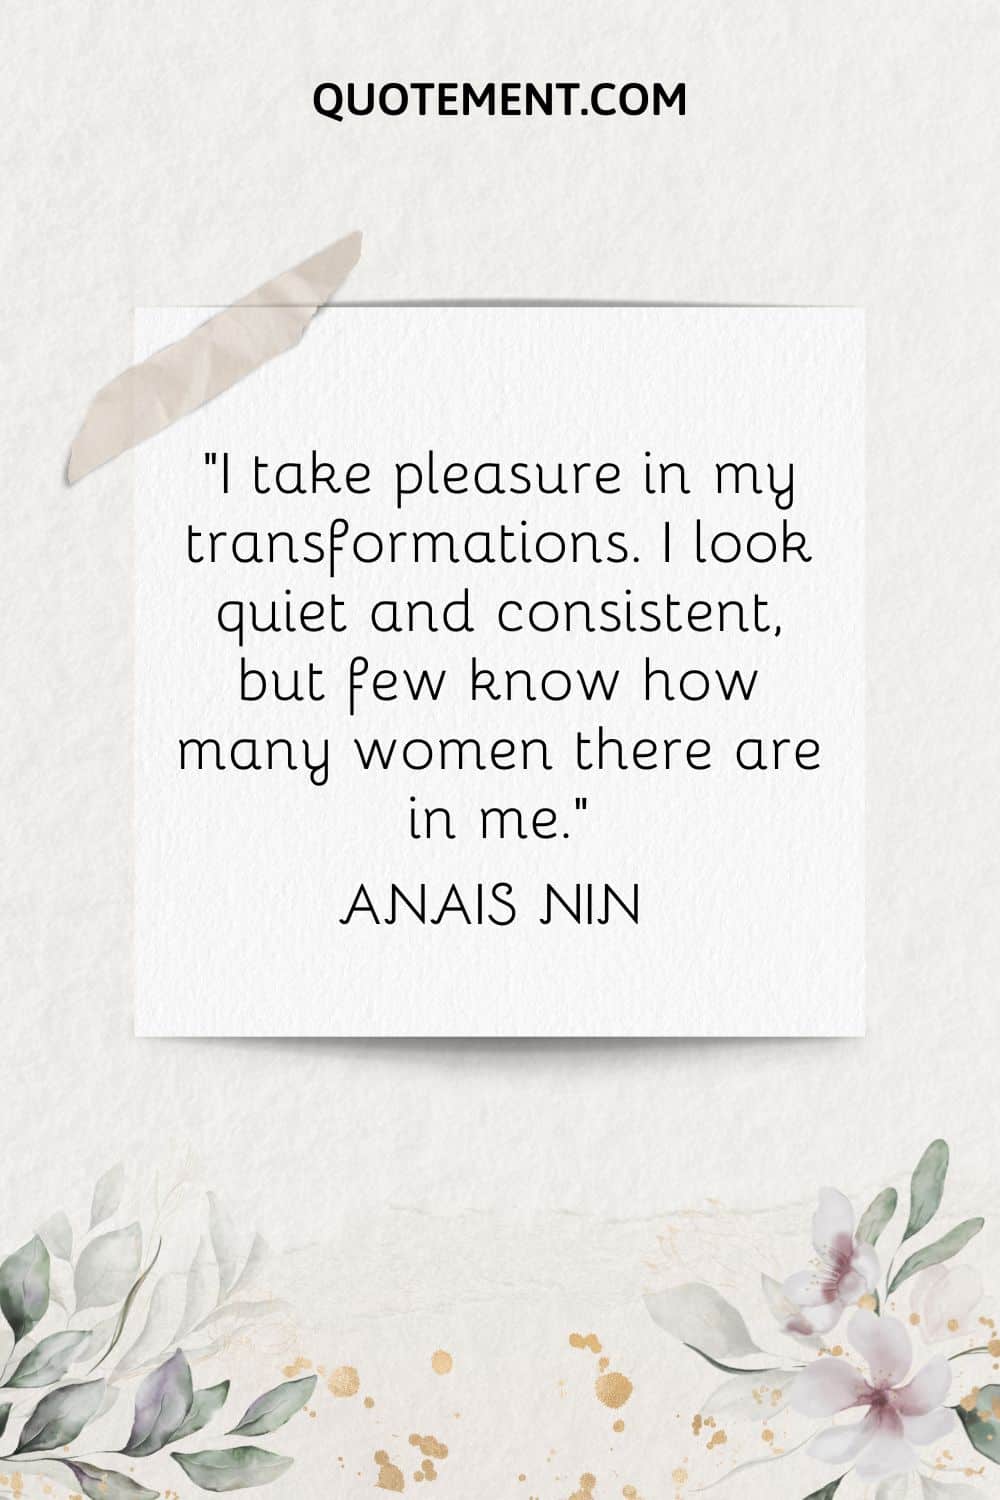 “I take pleasure in my transformations. I look quiet and consistent, but few know how many women there are in me.” ― Anais Nin